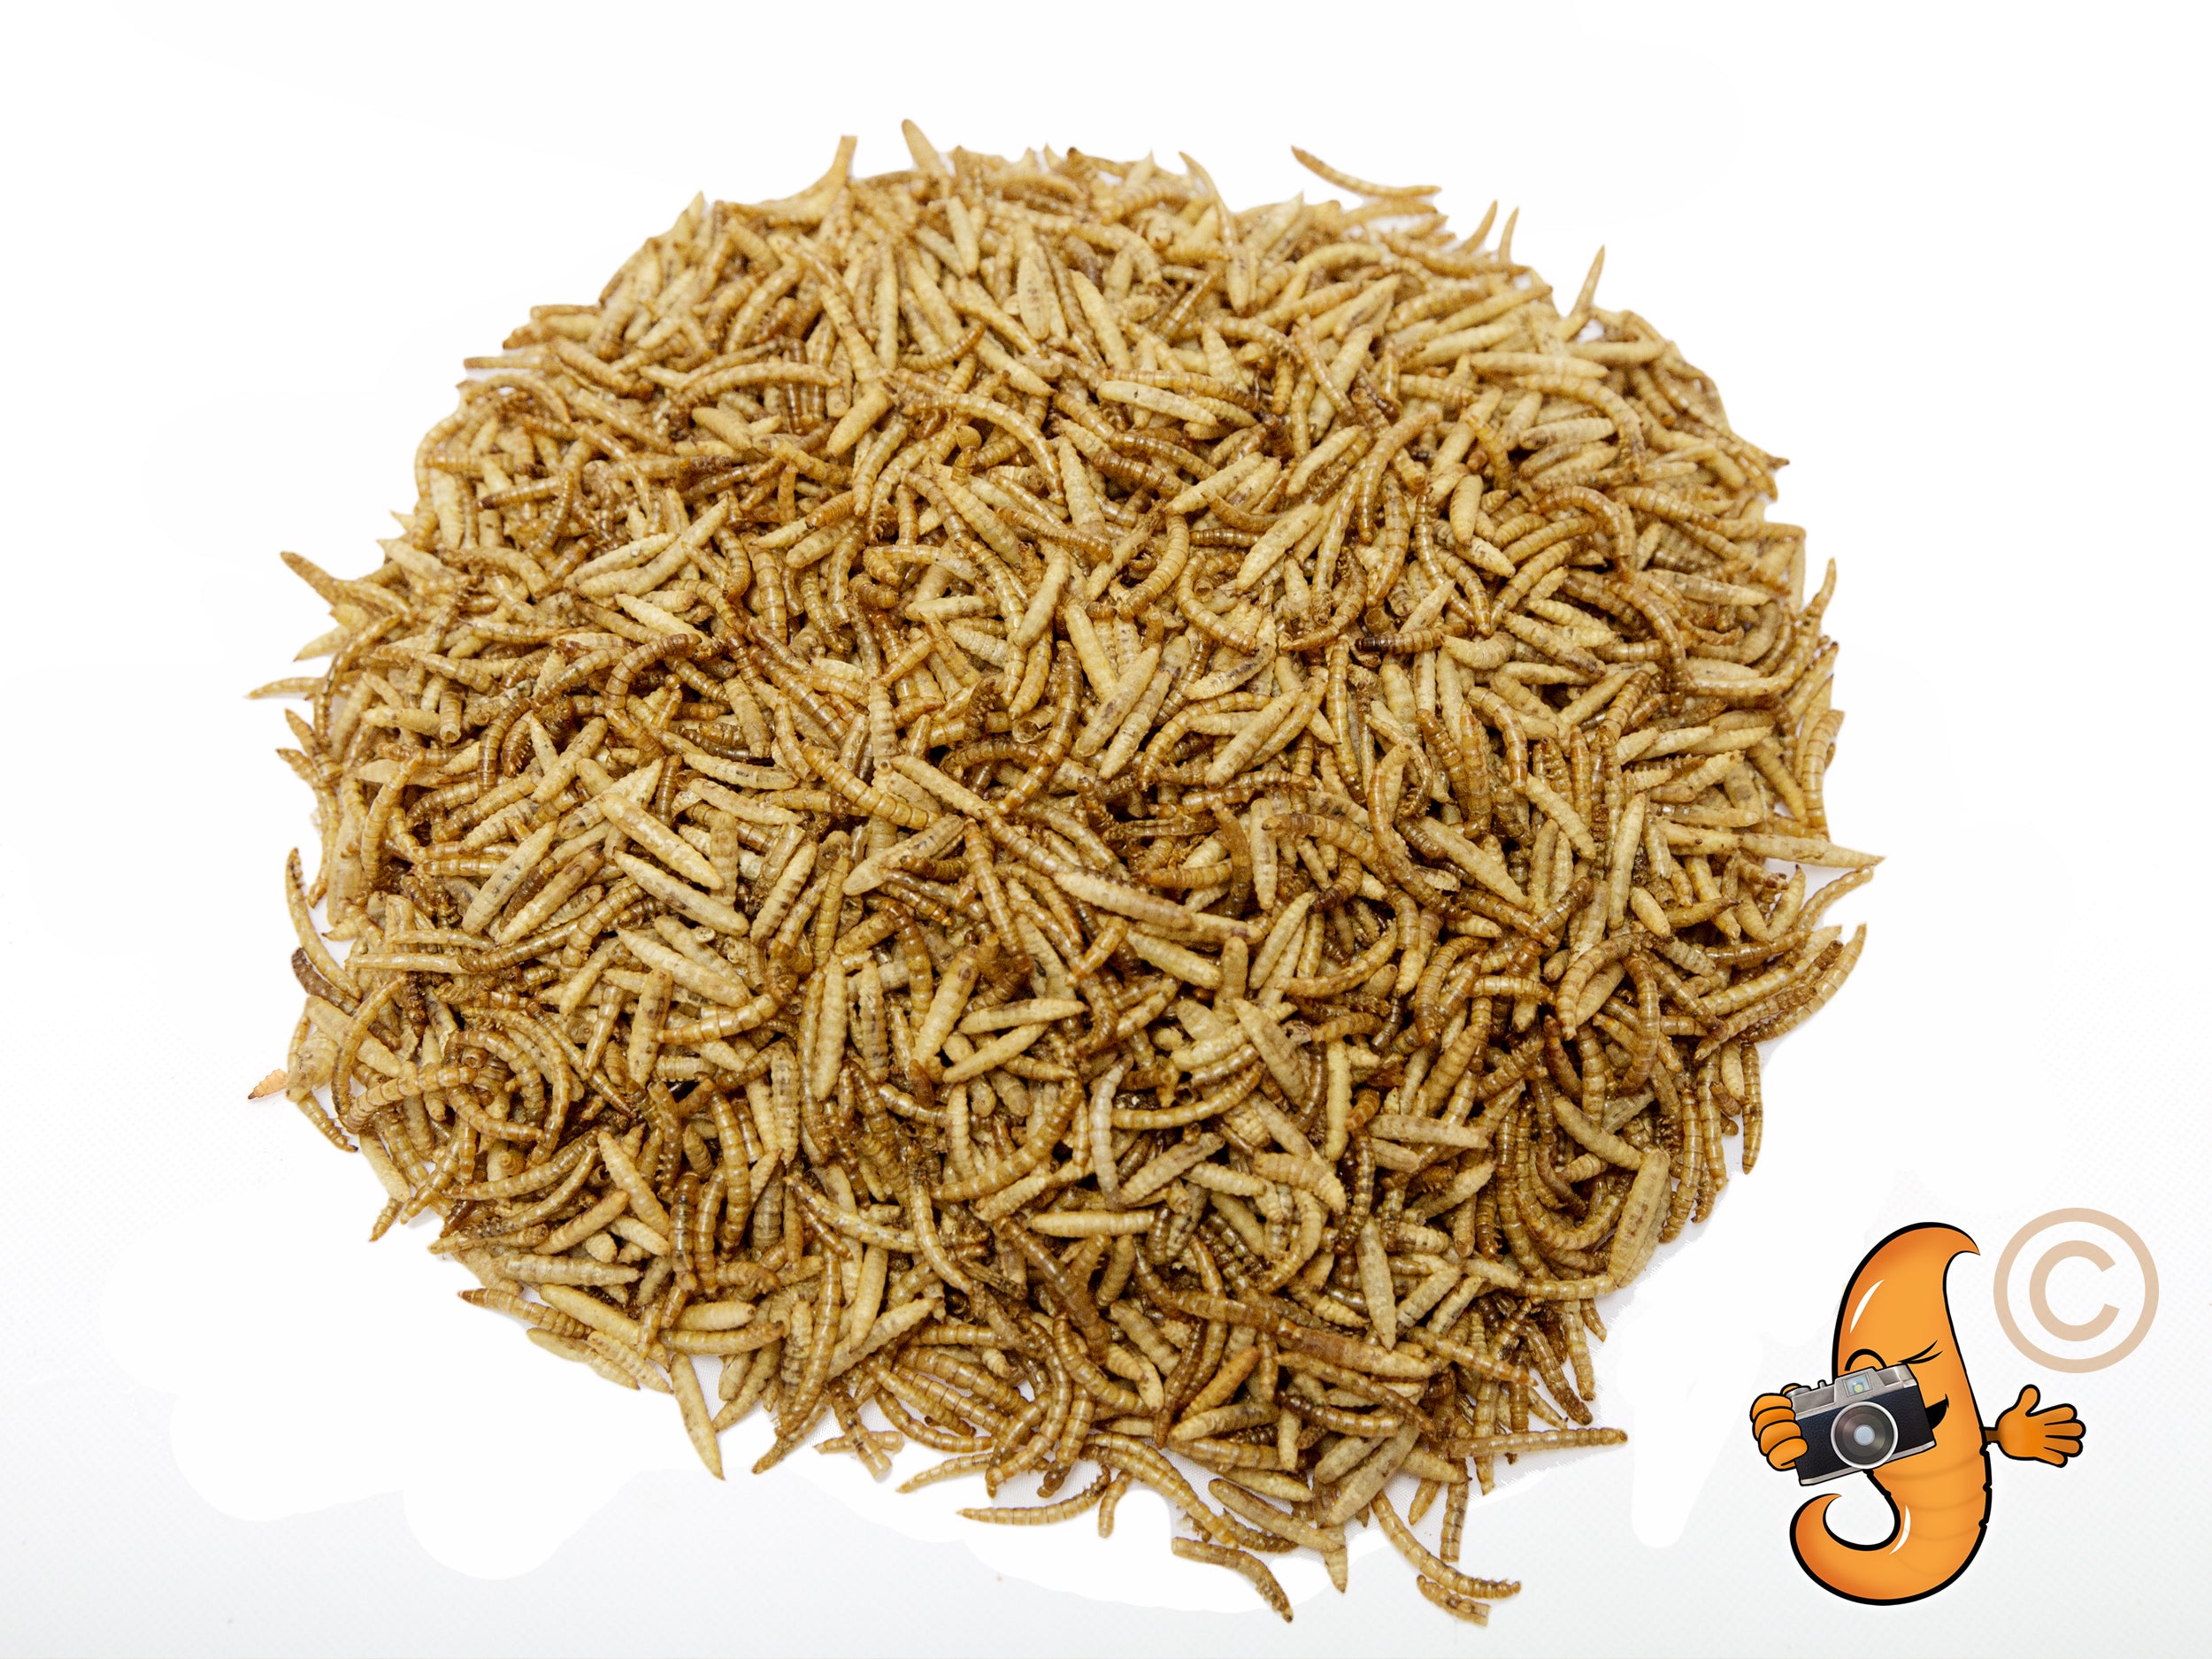 908g (2lb) Chubby Mix (Mealworm & Black Soldier Fly Larvae)